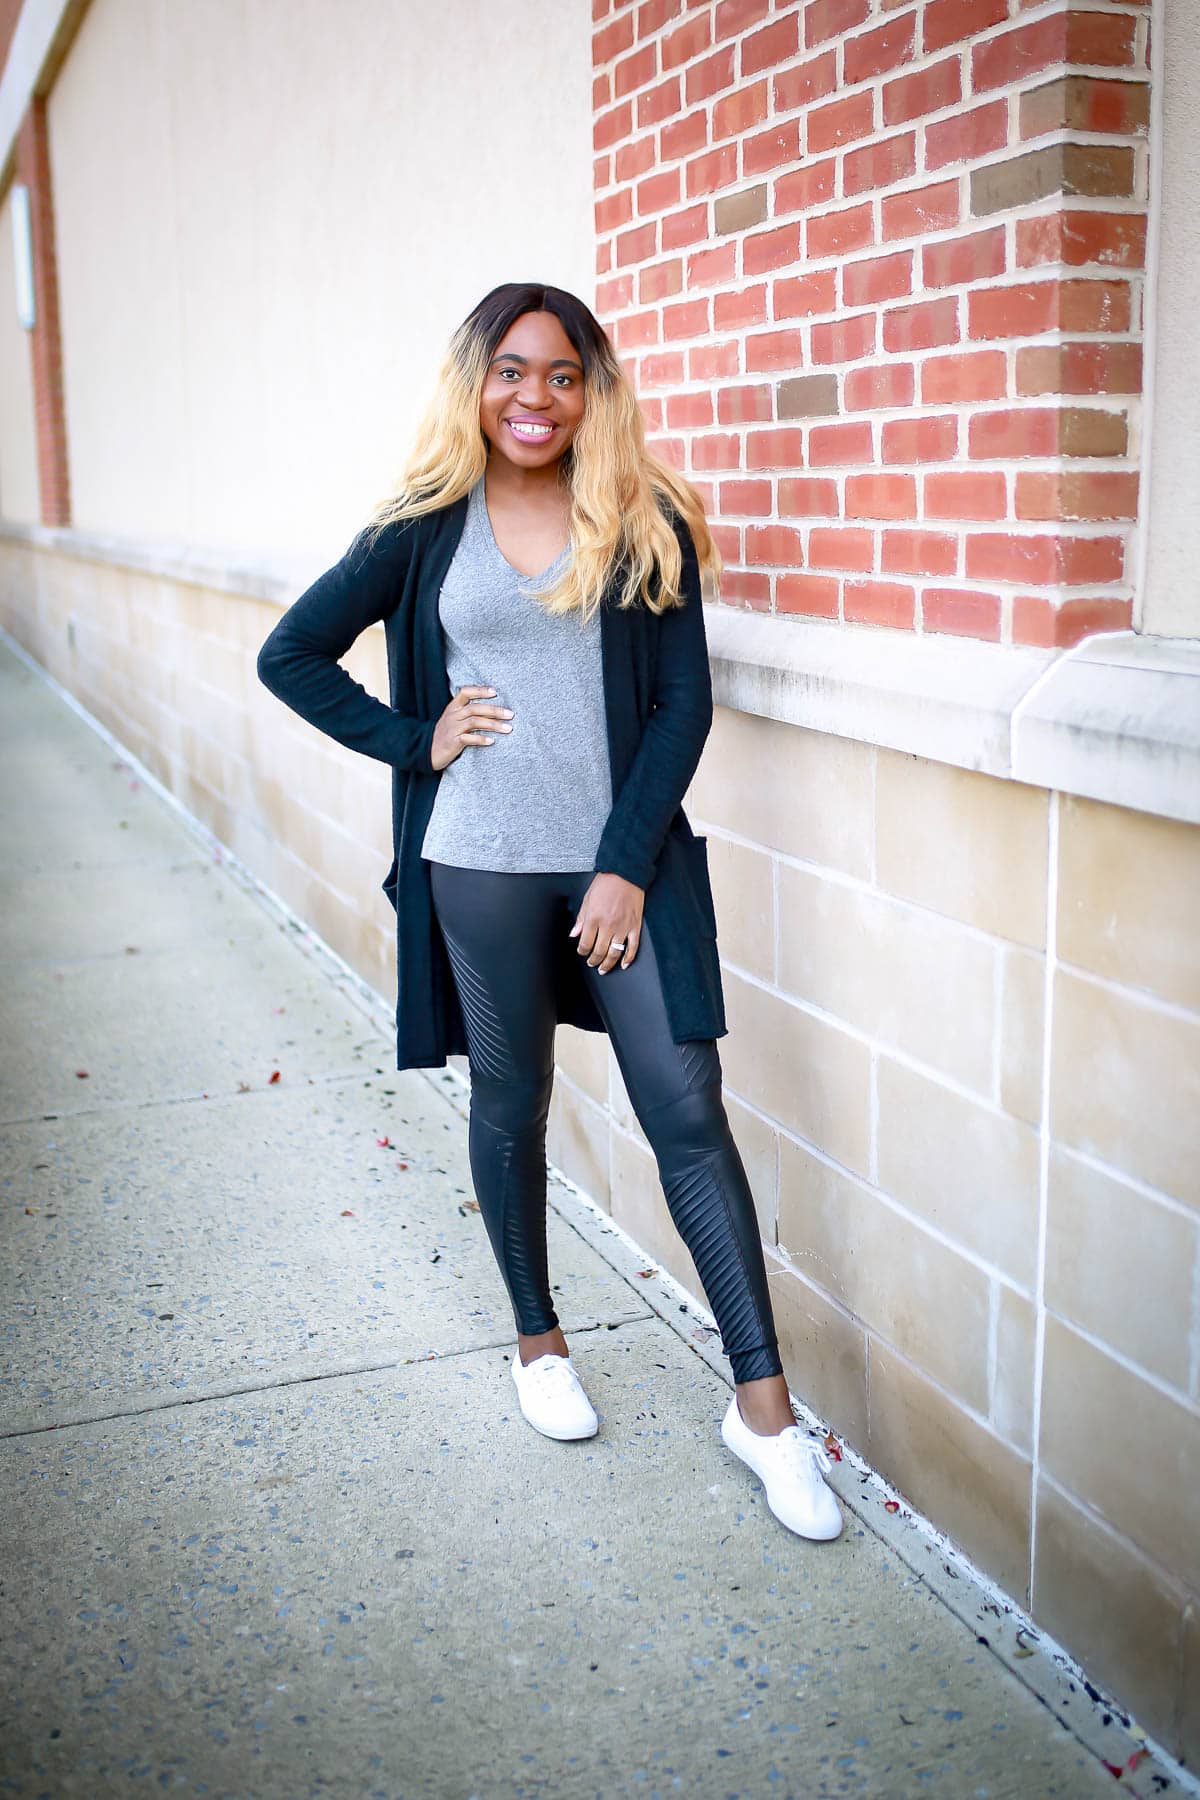 Spanx Faux Leather Leggings Review: Best Nordstrom Faux Leather Leggings?